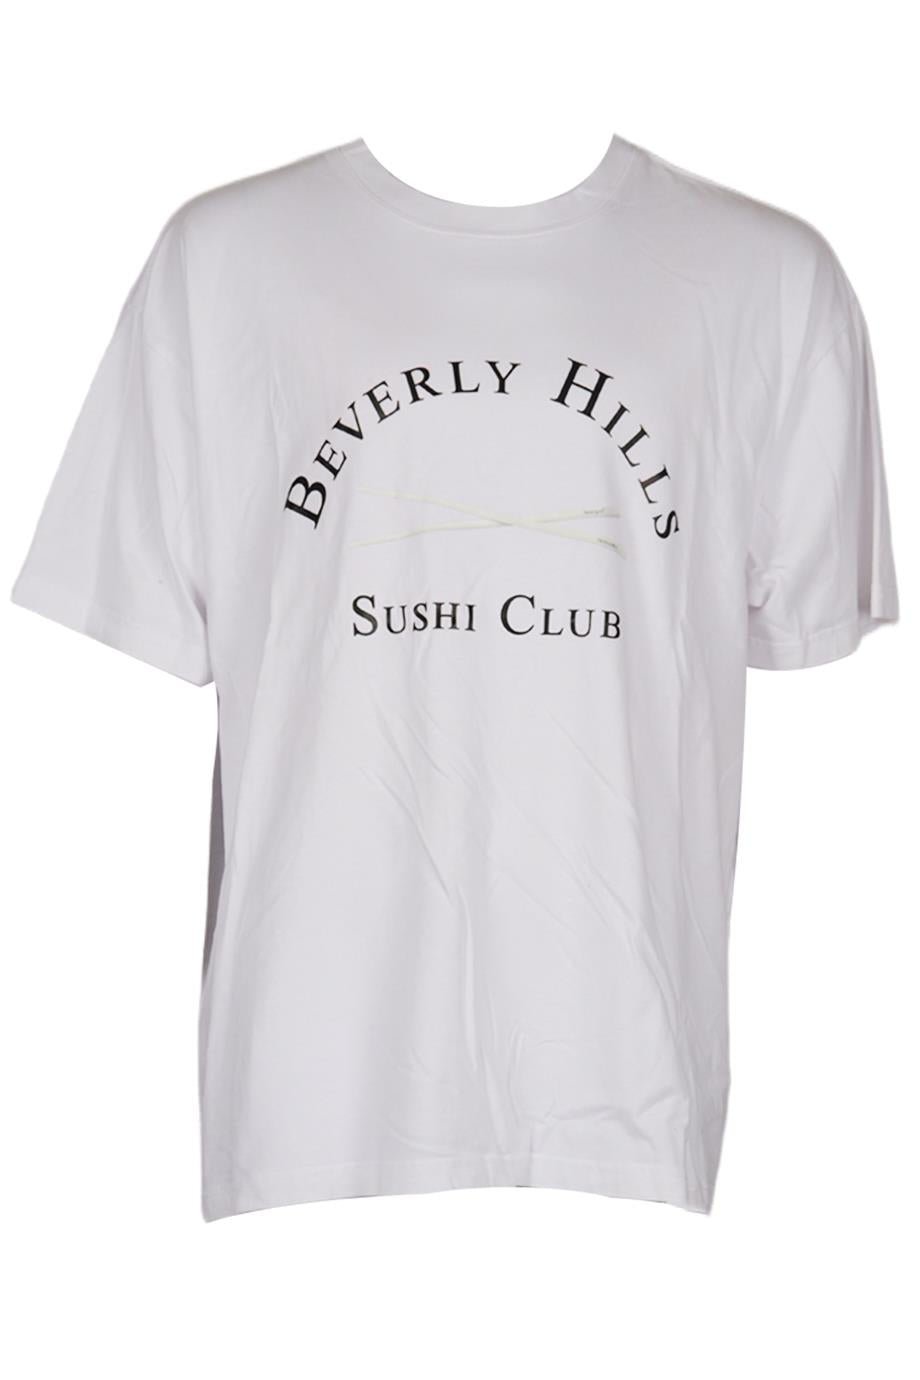 Beverly Hills Sushi Club STAMPD Tシャツ